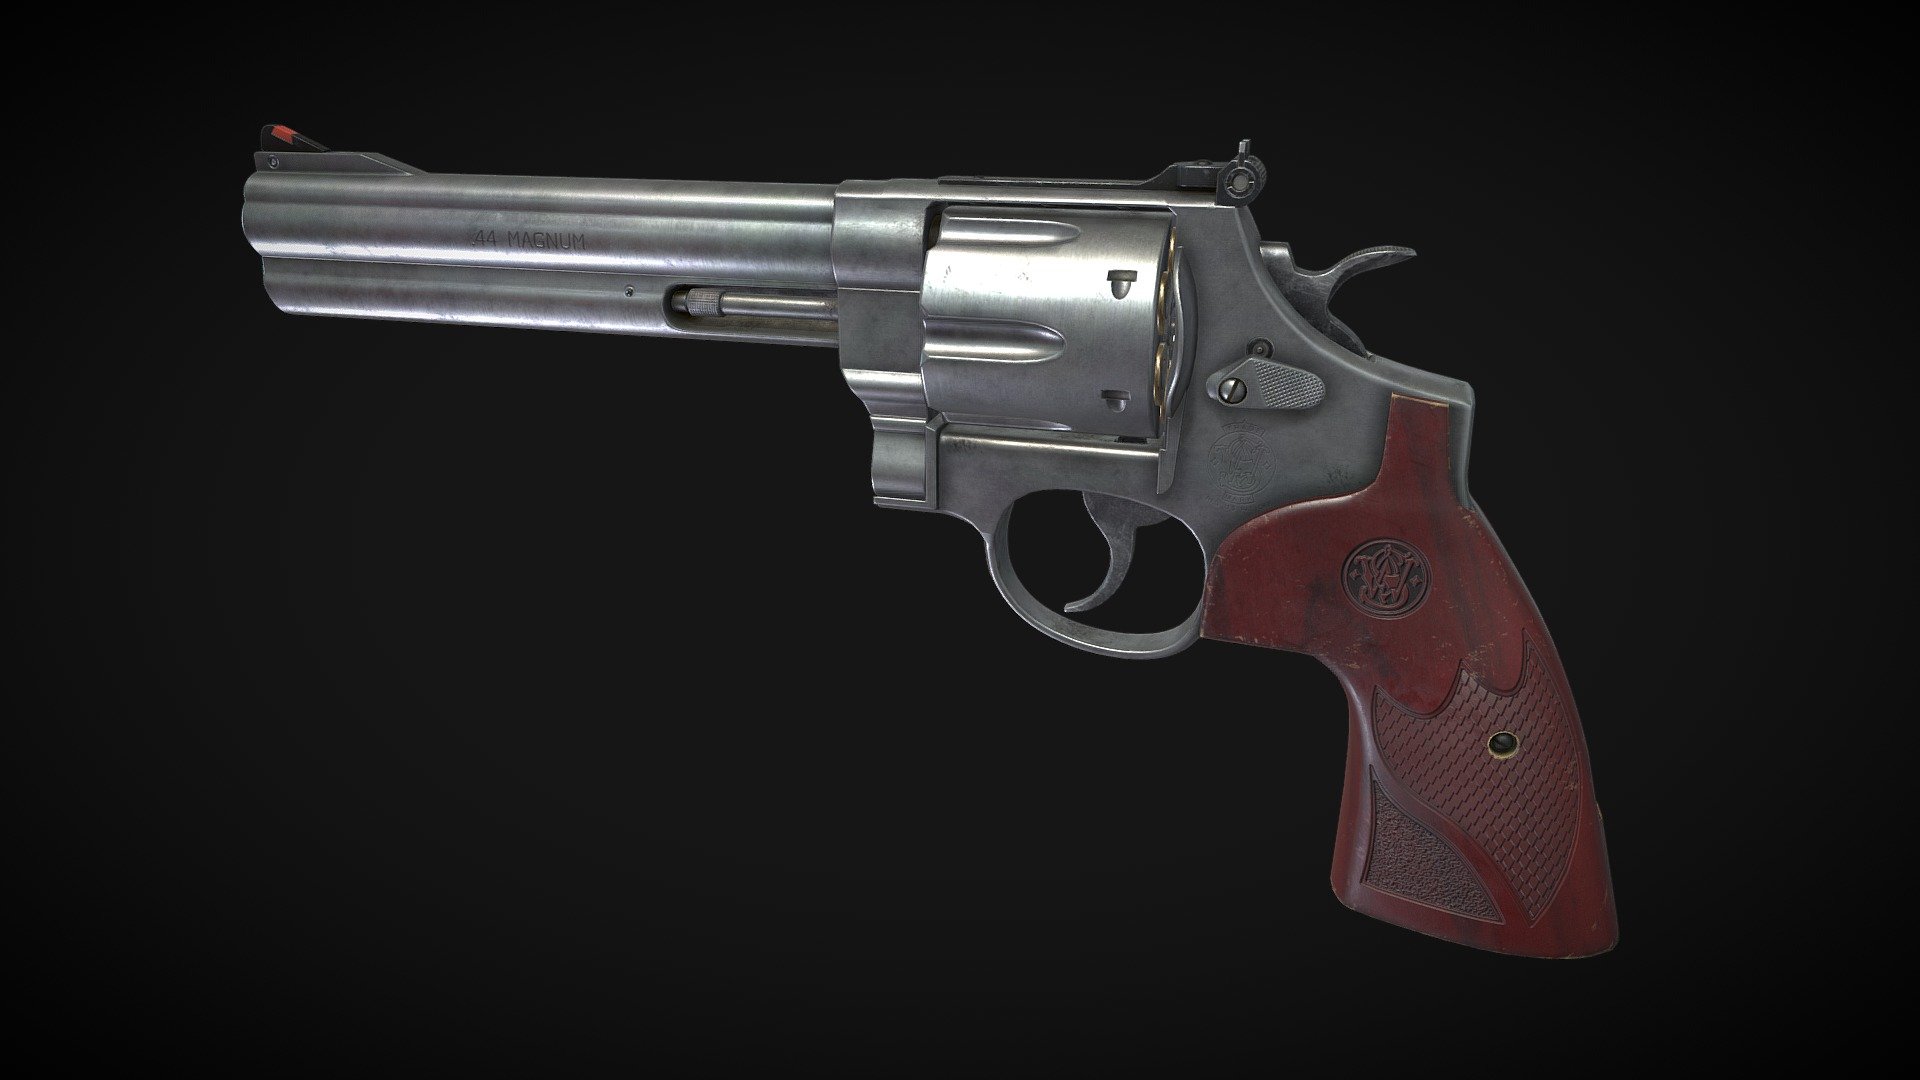 SnW M629 Deluxe revolver plus five different types of Magnum44 bullet. A remake of gaming lowpoly project based on my previous model.
Optimized the mesh, rearranged UV maps, repainted textures, and manually processed LODs.

Files Includes:
- Standard grouped base model (Maya MB + FBX file)
- Separated all LODs (Axis at 0, MB + FBX)
- UE project file (v 4.27.2), all LODs are integrated, and meshes are assembled inside a Blueprint
- PNG Textures

Mesh Info:
- The revolver: (LODs in Tris) LOD0 14929, LOD1 7198, LOD2 3909, LOD3 1780, and LOD4 891
- Single bullet component: around LOD0 450, LOD1 230, LOD2 100, LOD3 26
- Separate parts: MainFrame, Hammer, Trigger, Plungers, Cylinder, CylinderCrane, CylinderEjector, CylinderReleaser, CylinderPin, BulletFull, ShellFull, ShellSingledSided, BulletHead

Texture Info:
- 2 Material Sets, 4k for the revolver, 1k for the bullets
- Maps: BaseColor, Normal, RoughMetalAO(for UE), MatID(MaskedRGB), additional separated Roughness, Metallic, and AO - Smith & Wesson Model 629 Deluxe Magnum44 - Buy Royalty Free 3D model by Lyle (@lylecay) 3d model